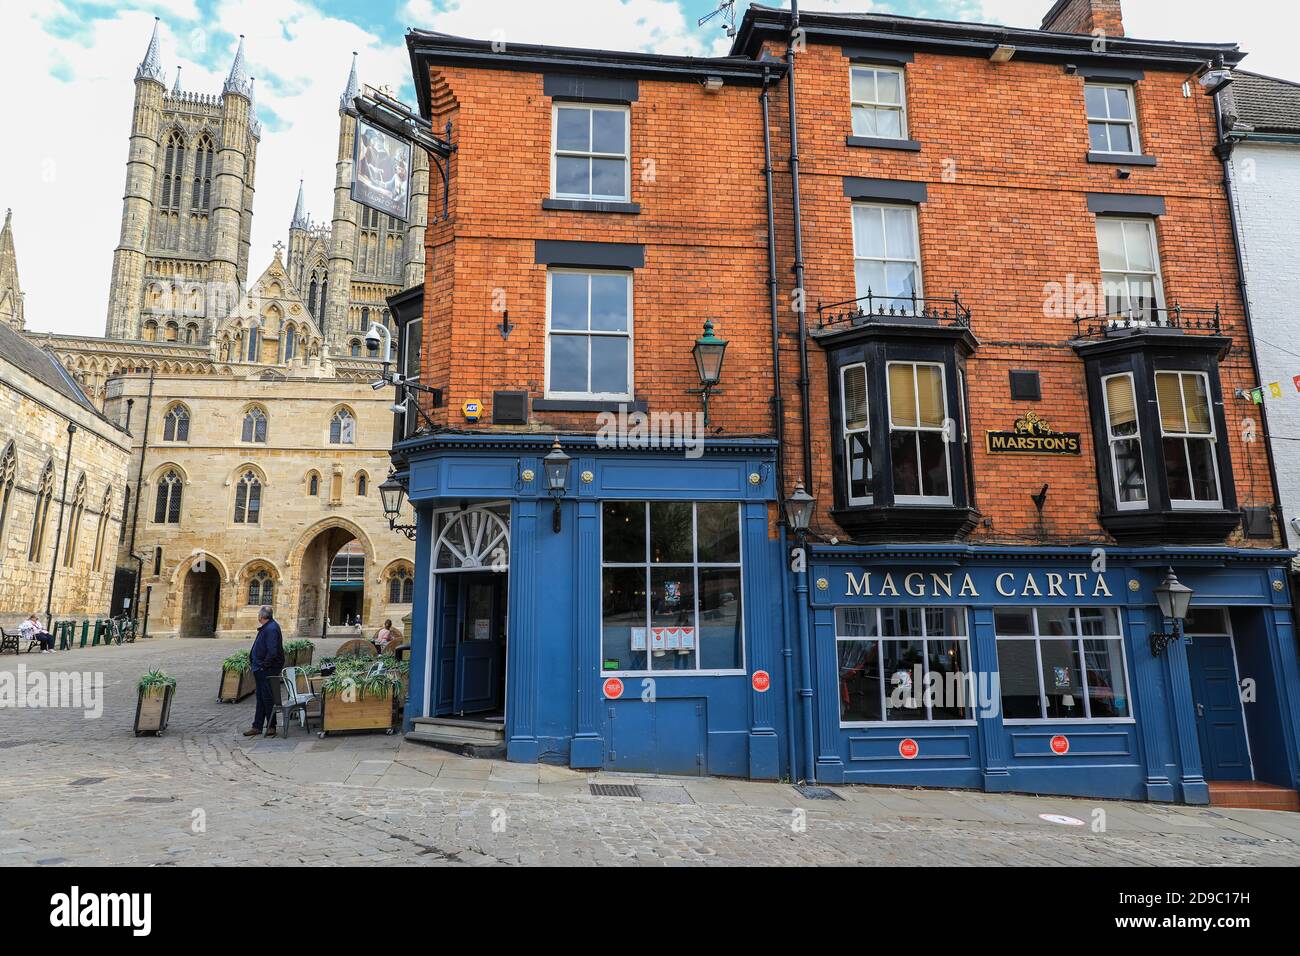 The Magna Carta pub or public house, City of Lincoln, Lincolnshire, England, UK Stock Photo